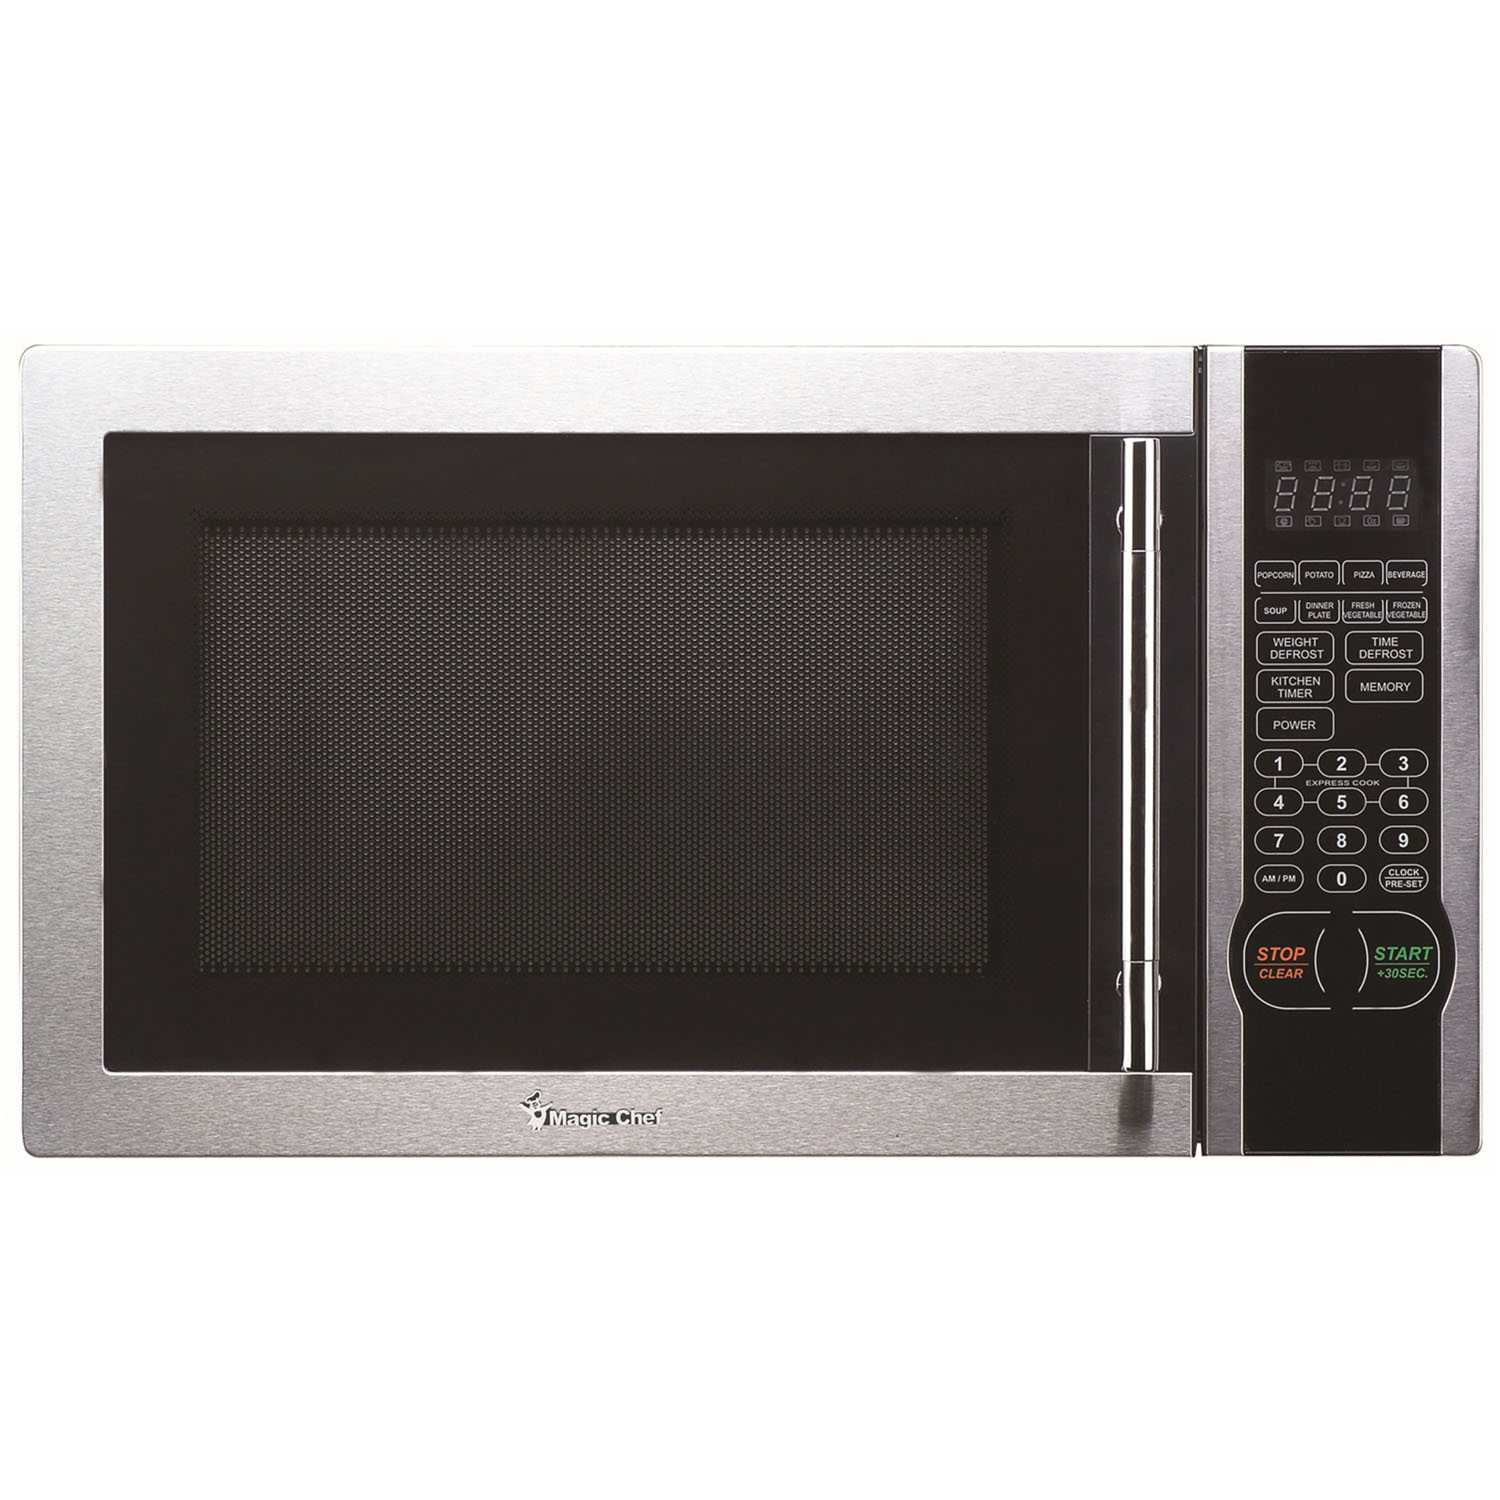 Magic Chef New1.1- Cu. ft. 1000W Countertop Microwave Oven with Stylish Door Handle, Stainless Steel - image 1 of 5